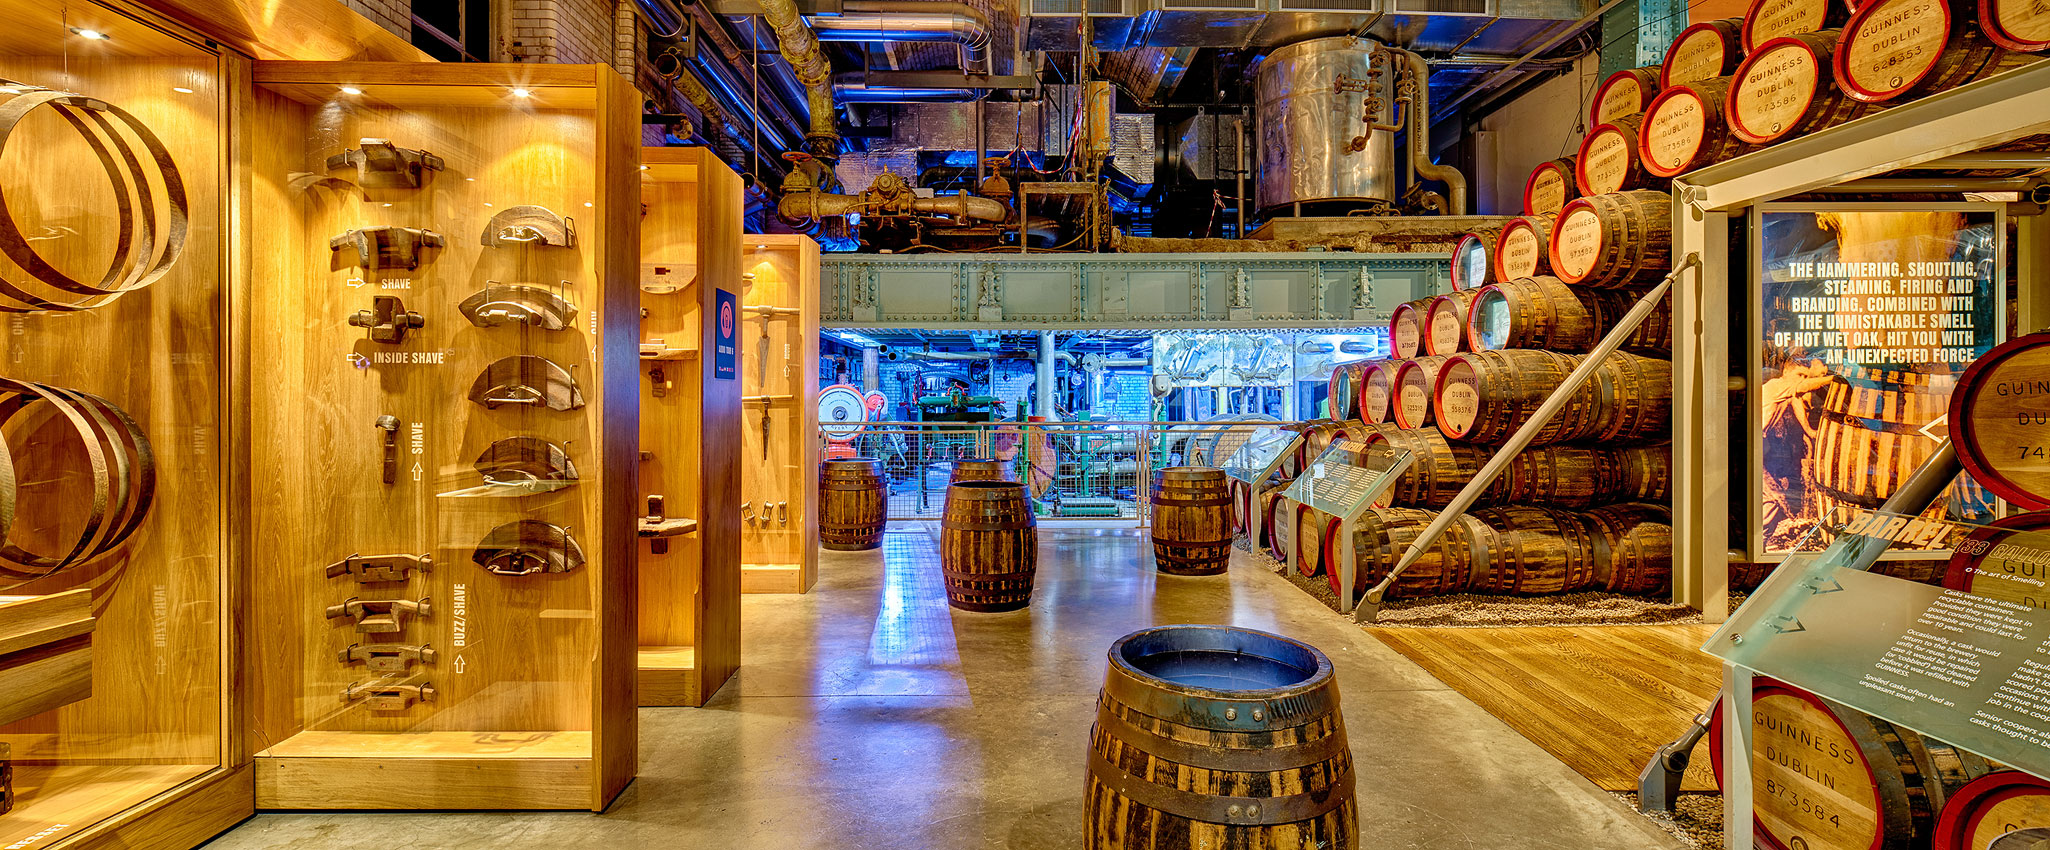 guinness storehouse cooperage commercial photographer ireland